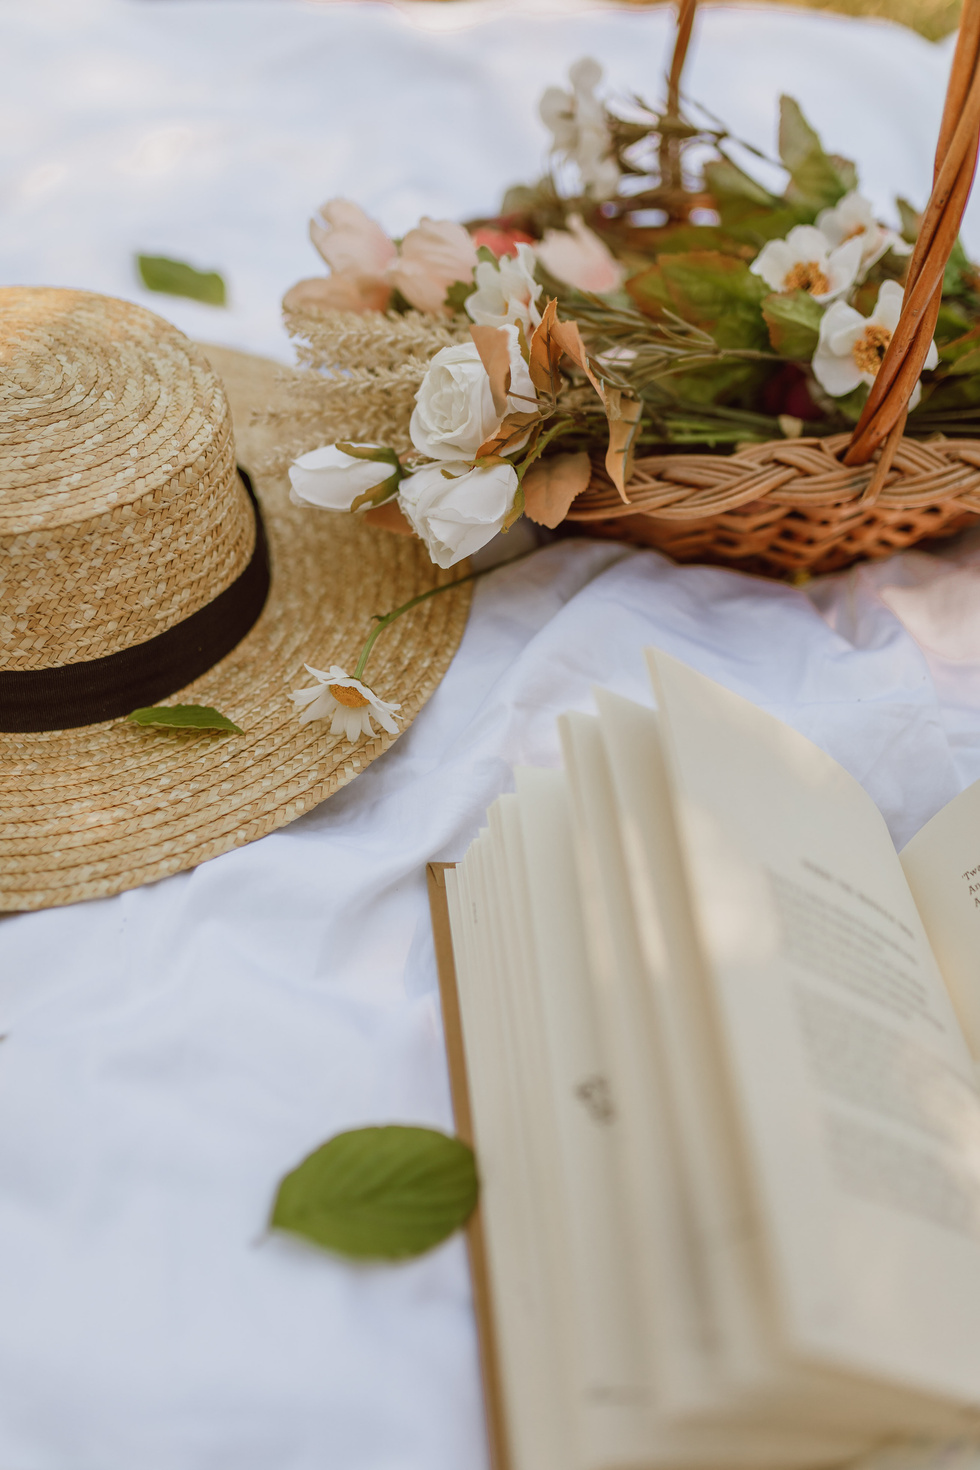 Book, Flowers, and Hat on a Blanket